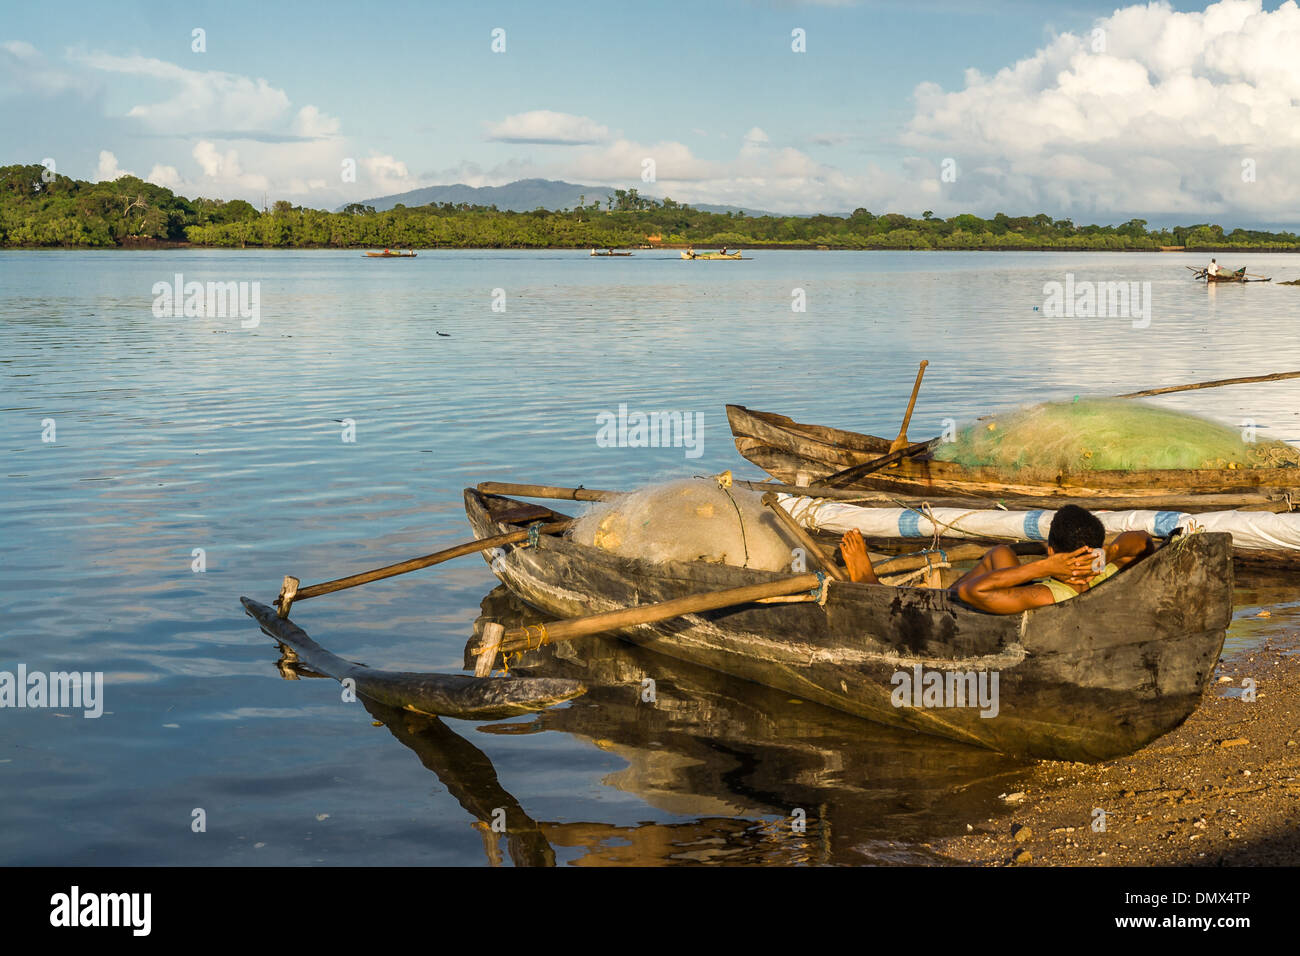 Malagasy people waiting in an outrigger canoe Stock Photo